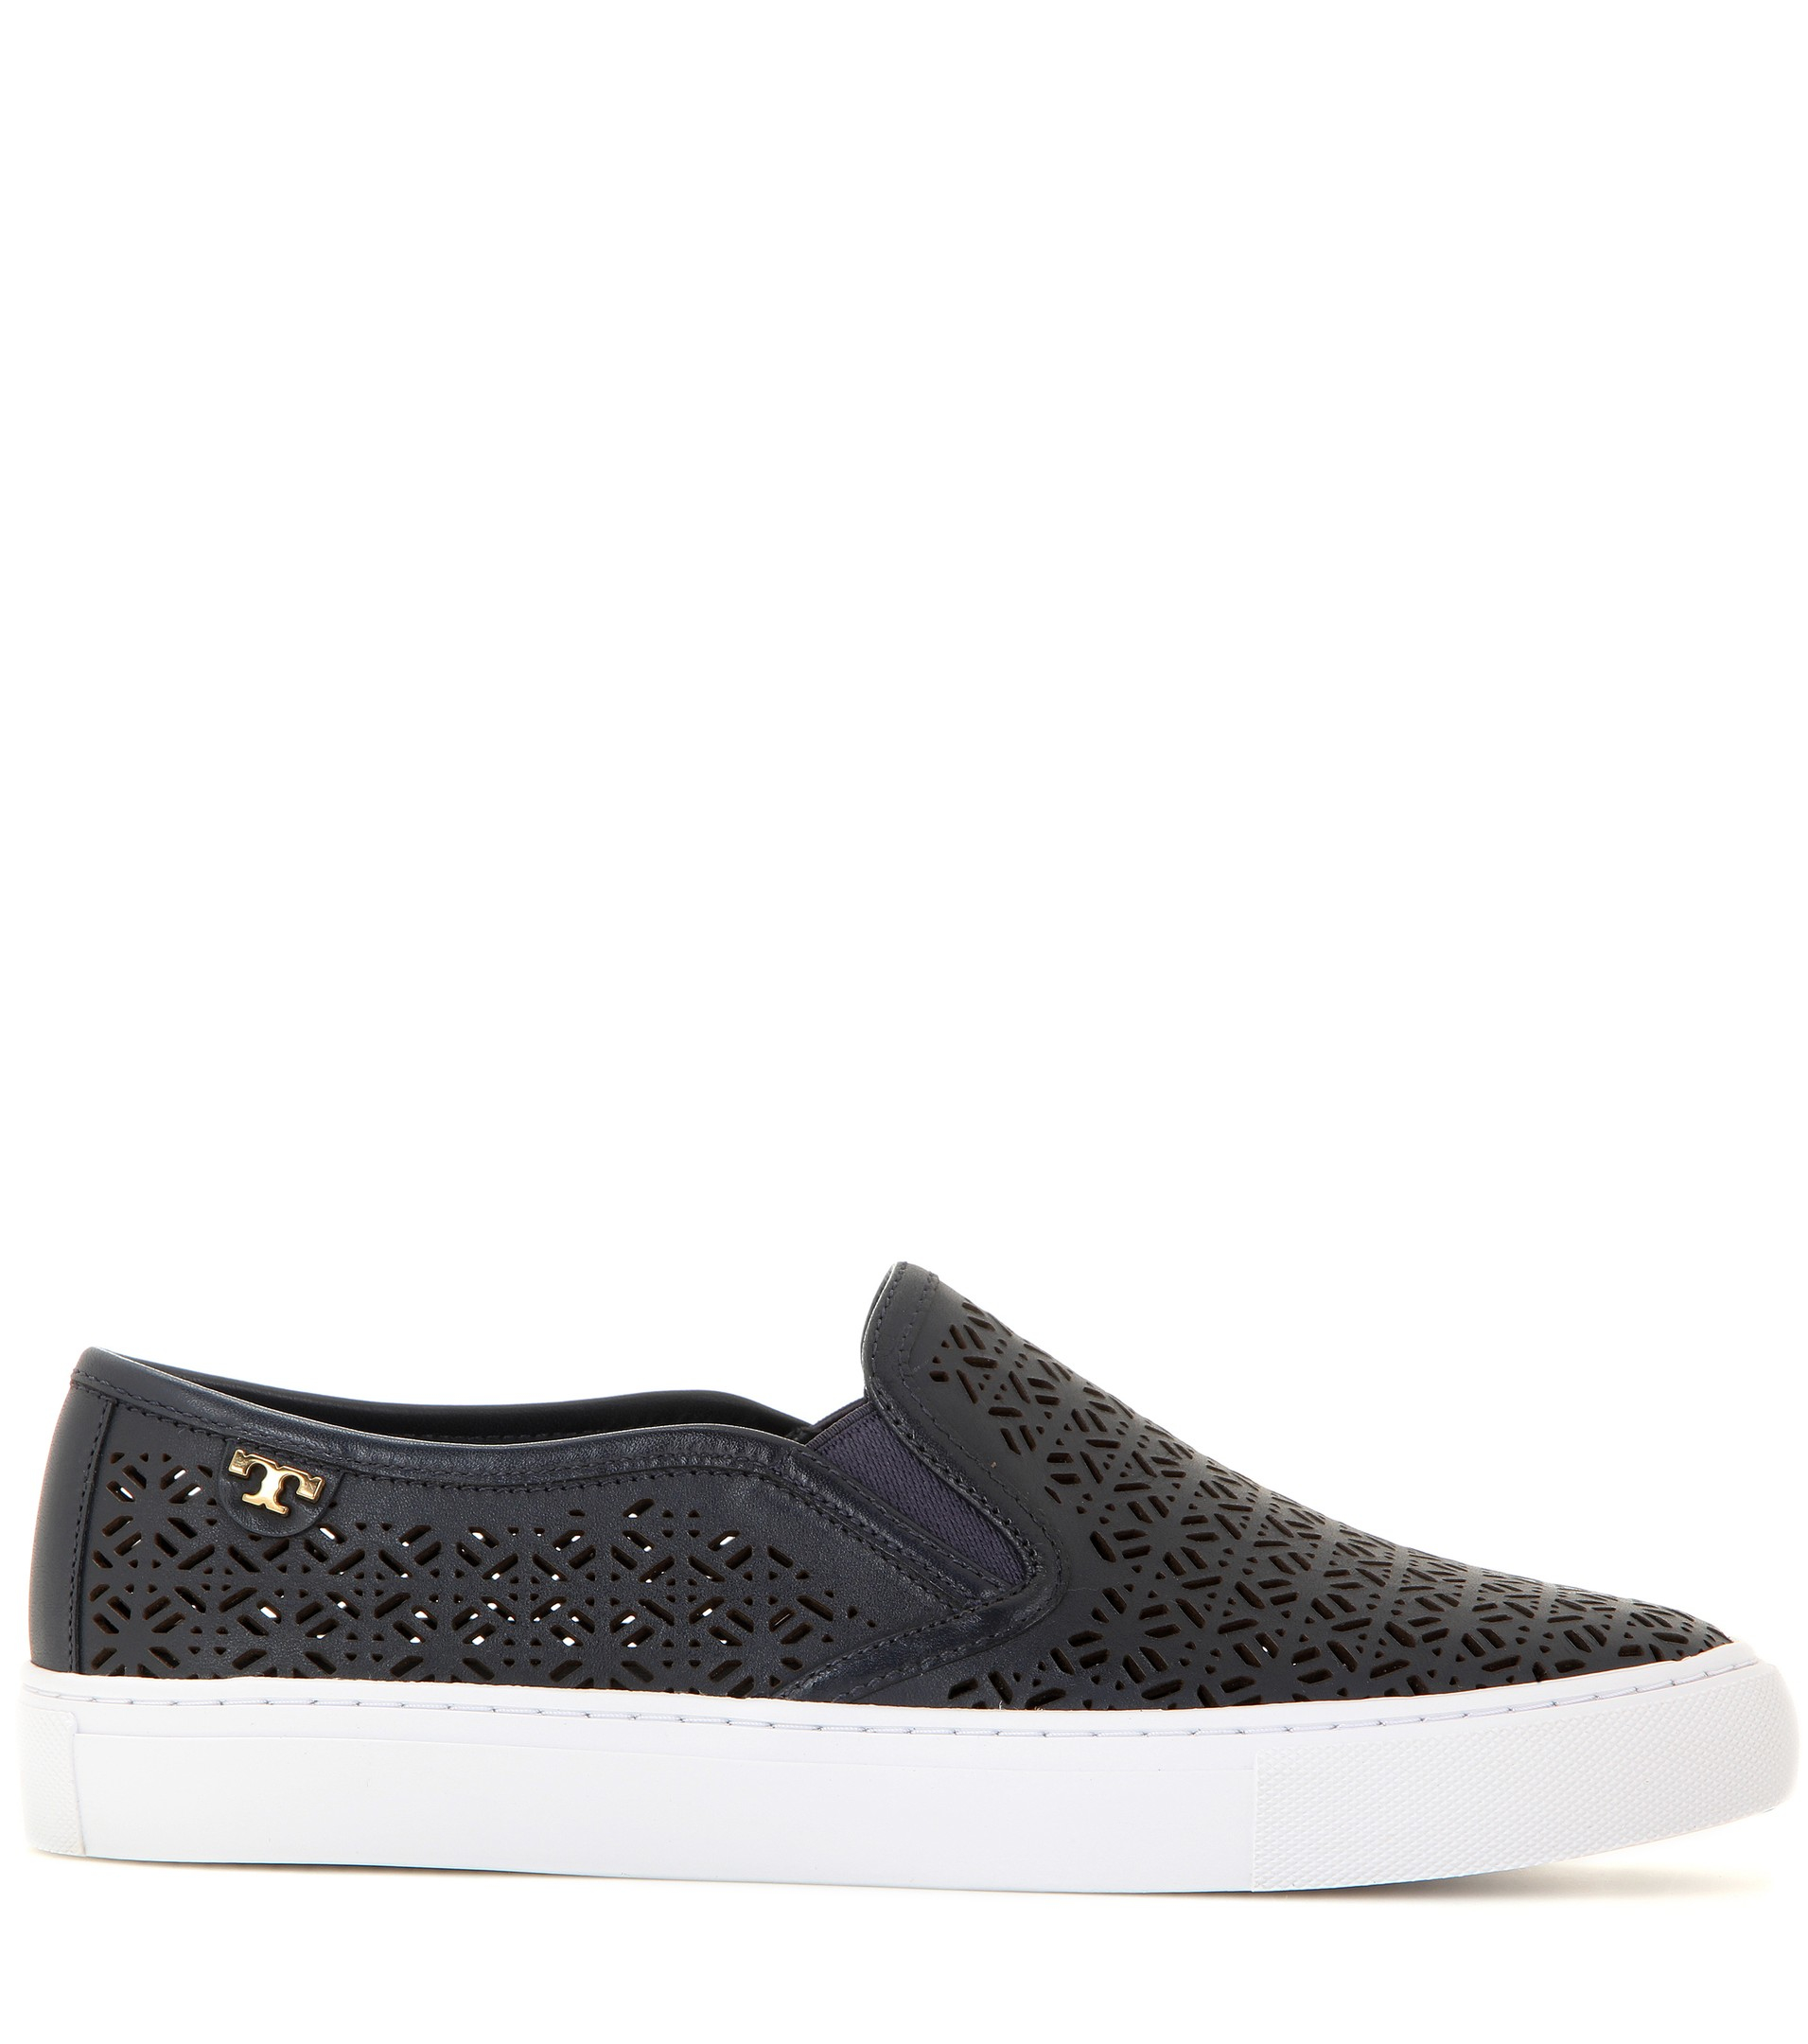 Tory Burch Lennon Perforated Leather Slip-on Sneakers in Black | Lyst